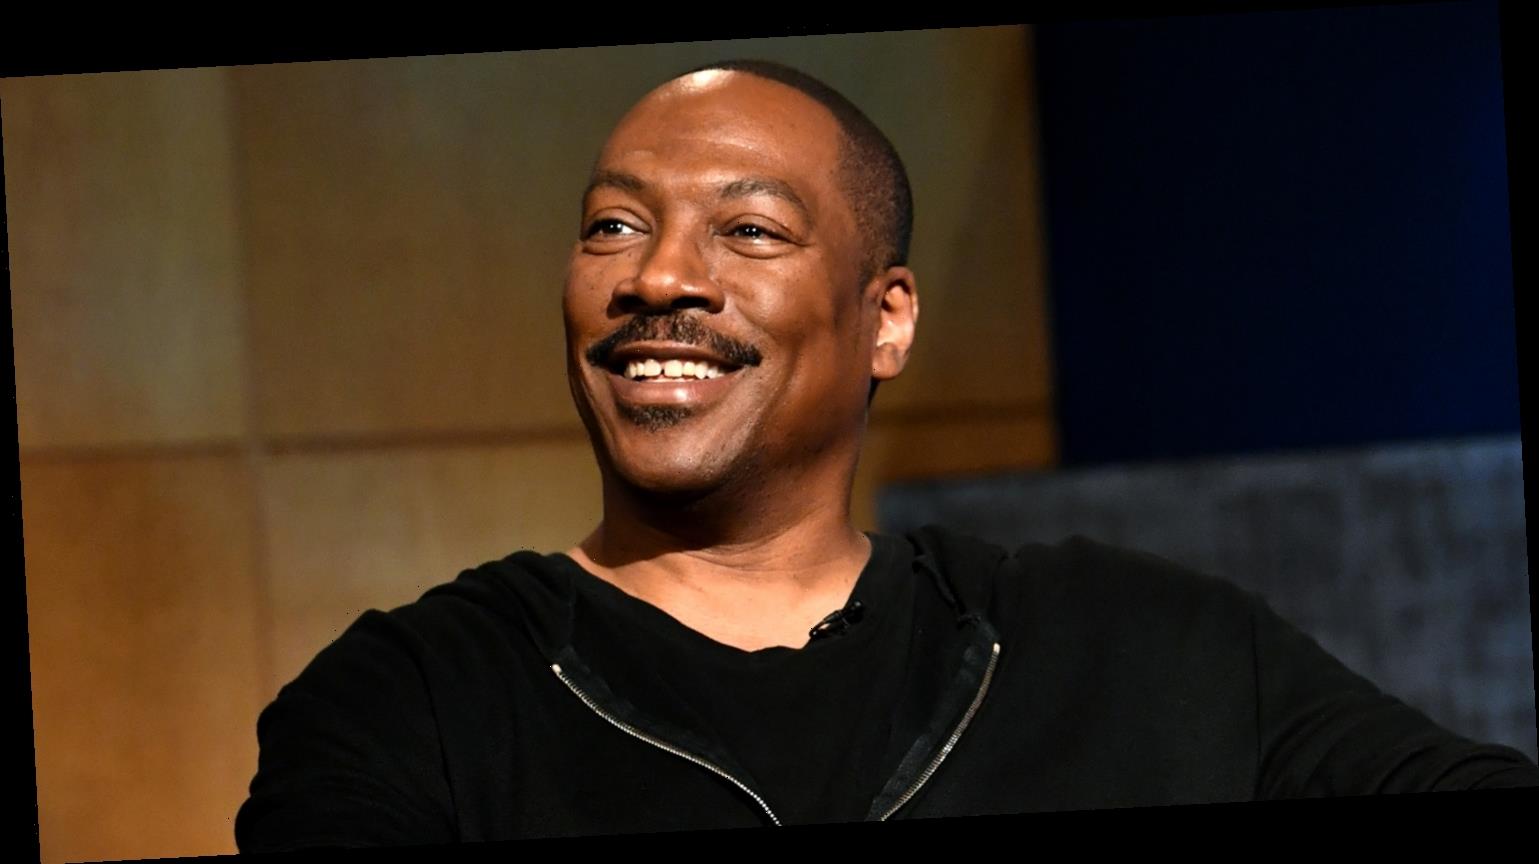 Eddie Murphy wins first Emmy award for guest actor in a comedy series